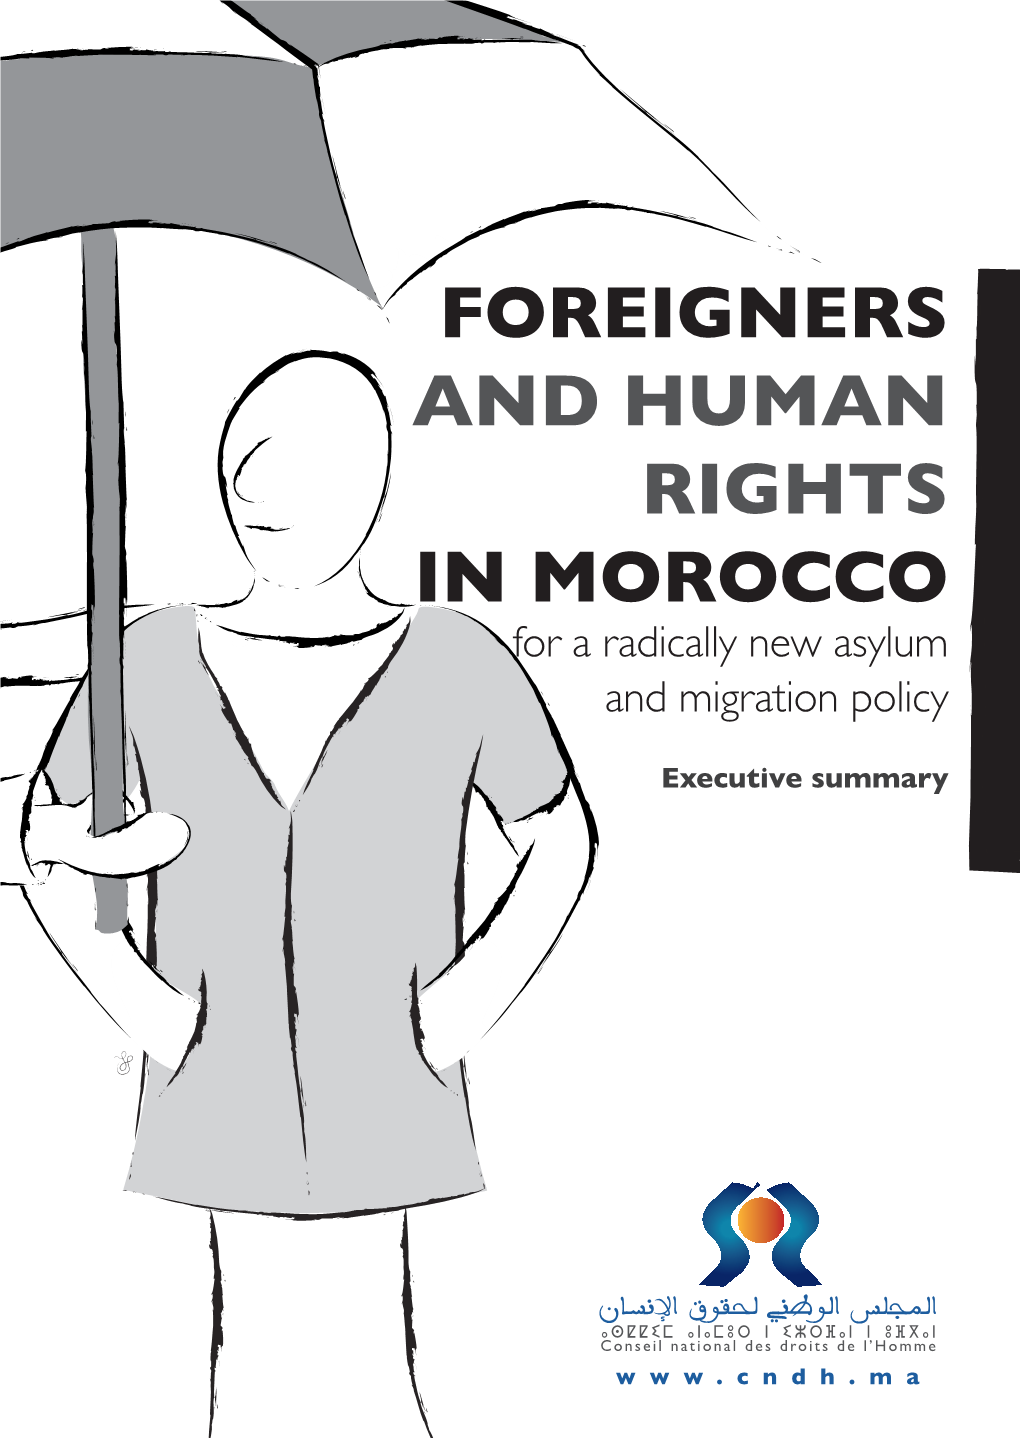 FOREIGNERS and HUMAN RIGHTS in MOROCCO for a Radically New Asylum and Migration Policy